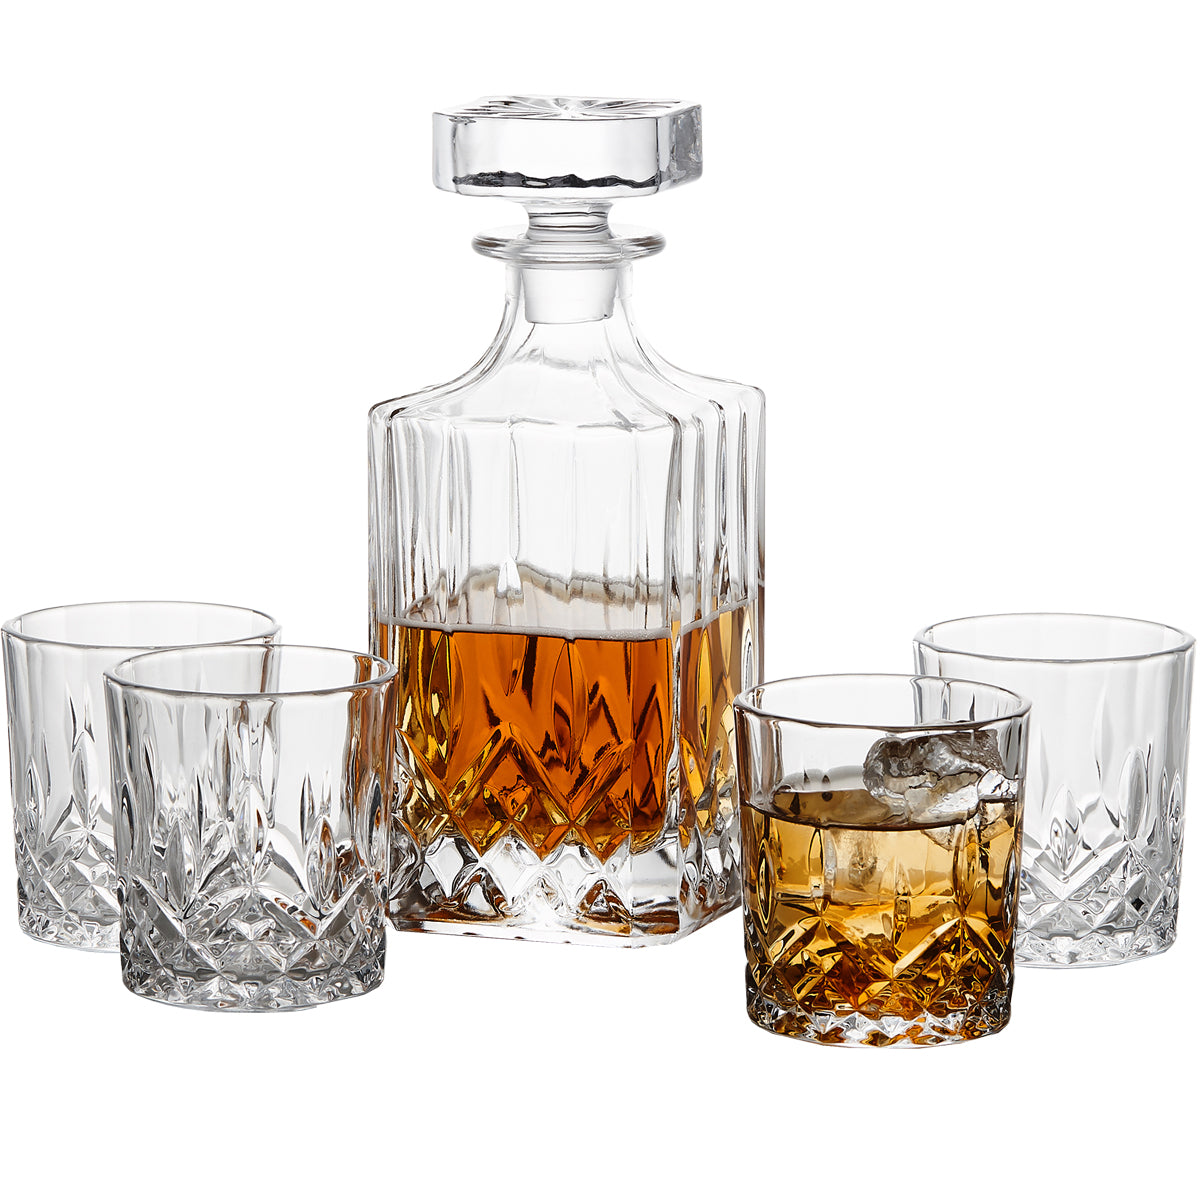 Vintorio GoodGlassware Highball Glasses (Set of 4) 13.5 oz -  Tall Drinking Glass with Heavy Base - for Water, Juice, Cocktails, and  Beverages - Dishwasher Safe, Perfect for Kitchen & Bar: Highball Glasses